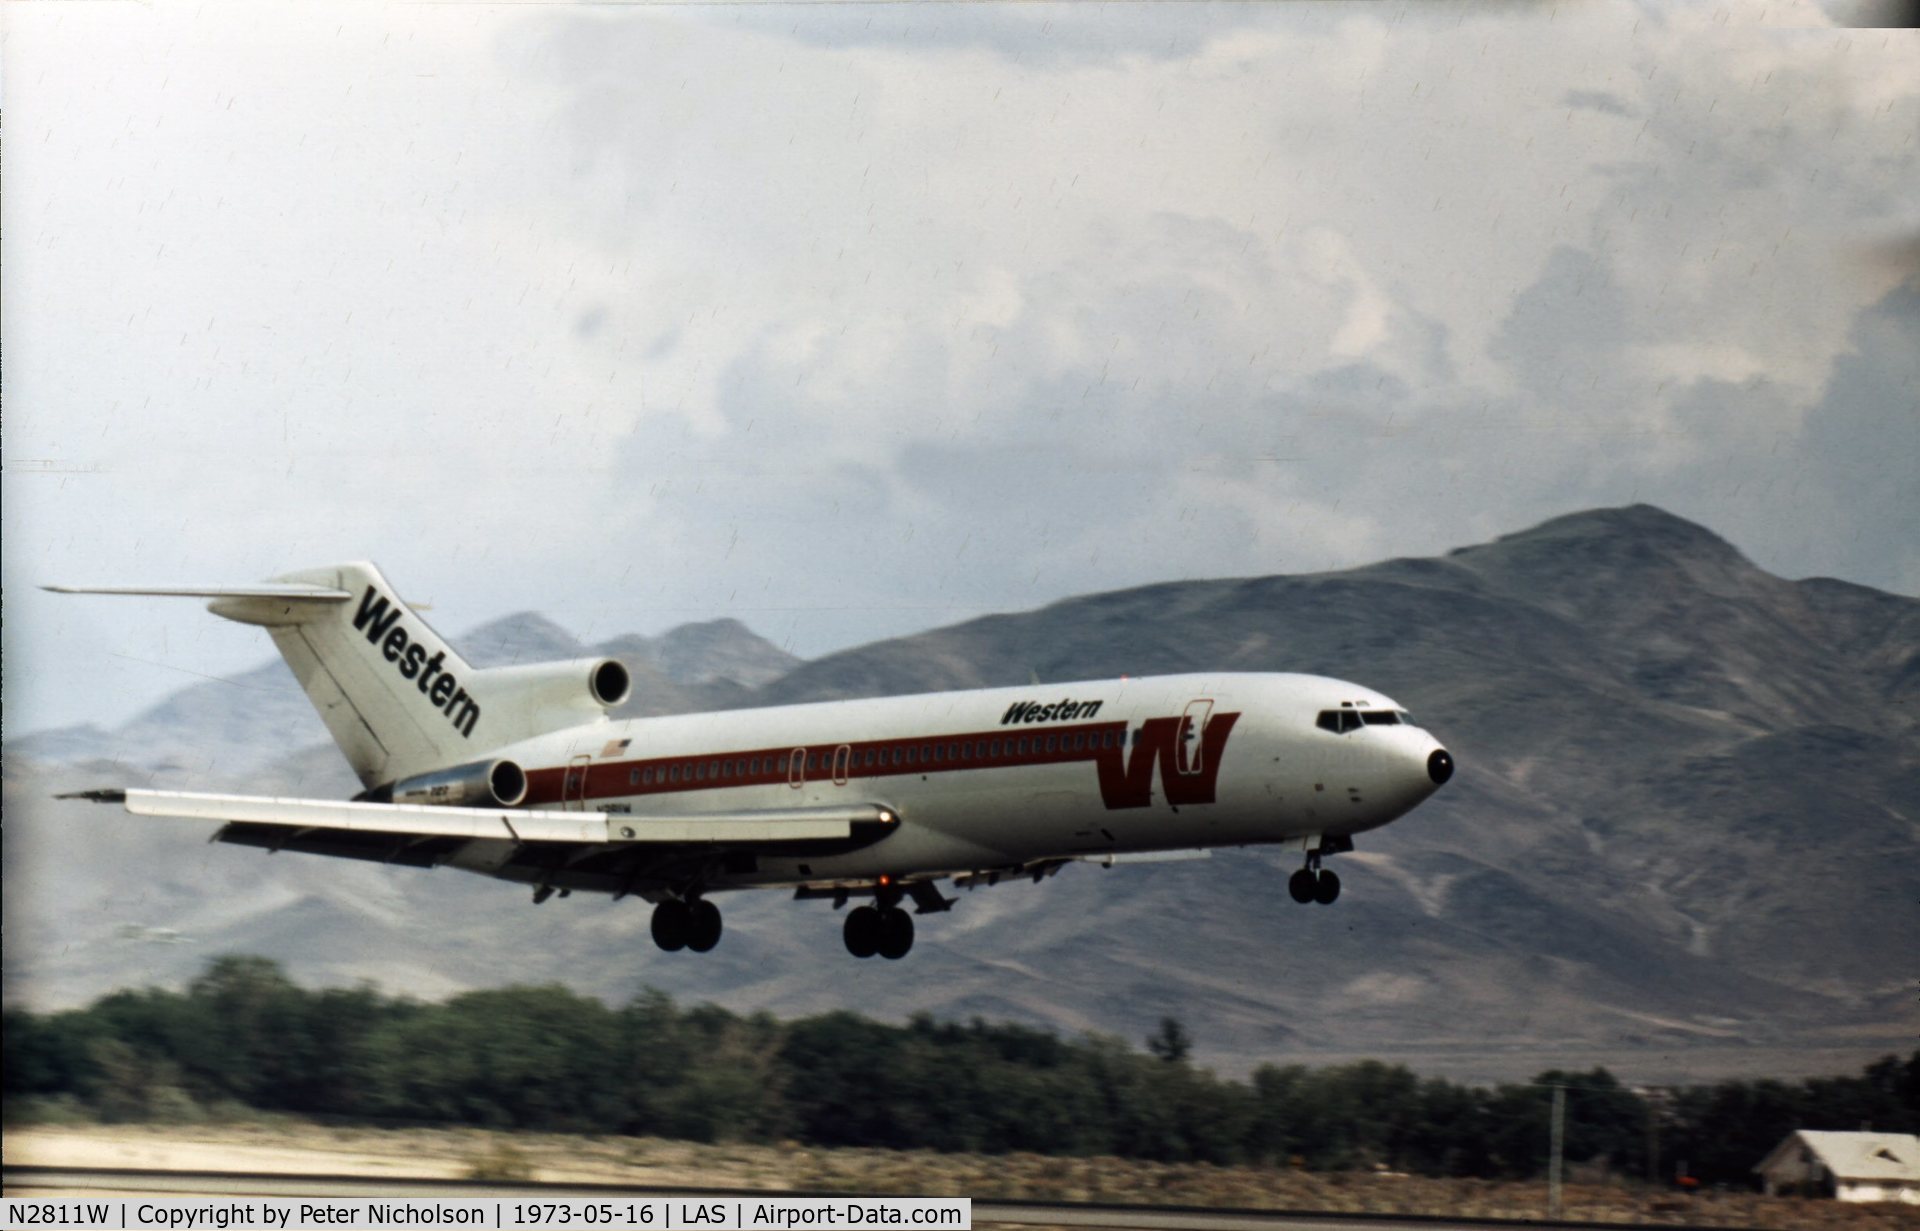 N2811W, 1972 Boeing 727-247 C/N 20649, In May 1973 at Las Vegas was in service with Western Airlines.